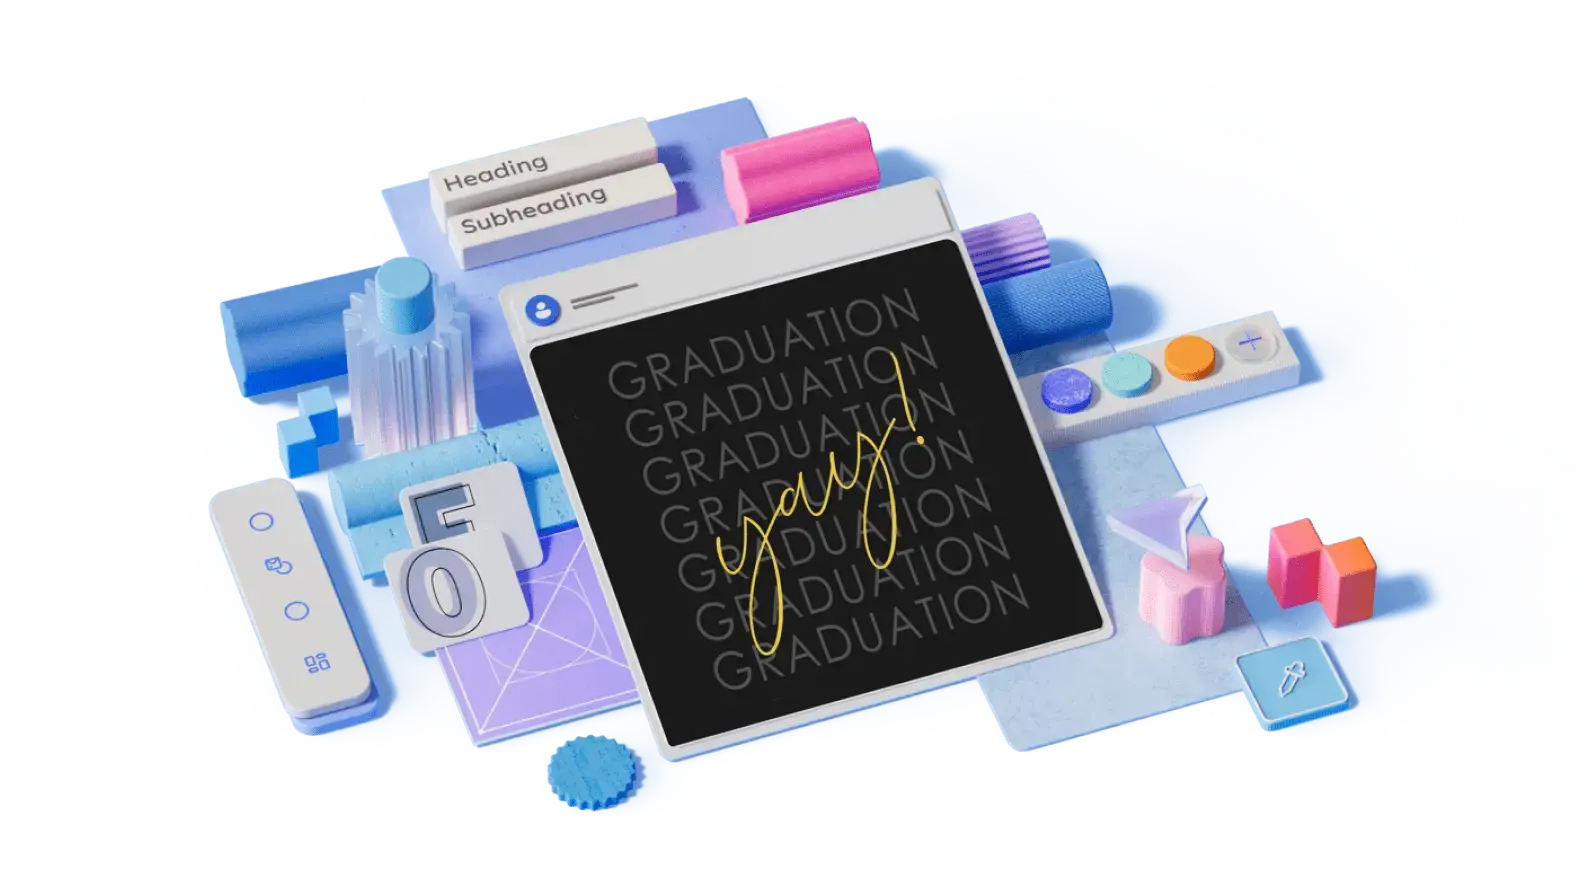 Graduation template surrounded by 3D illustrated design elements